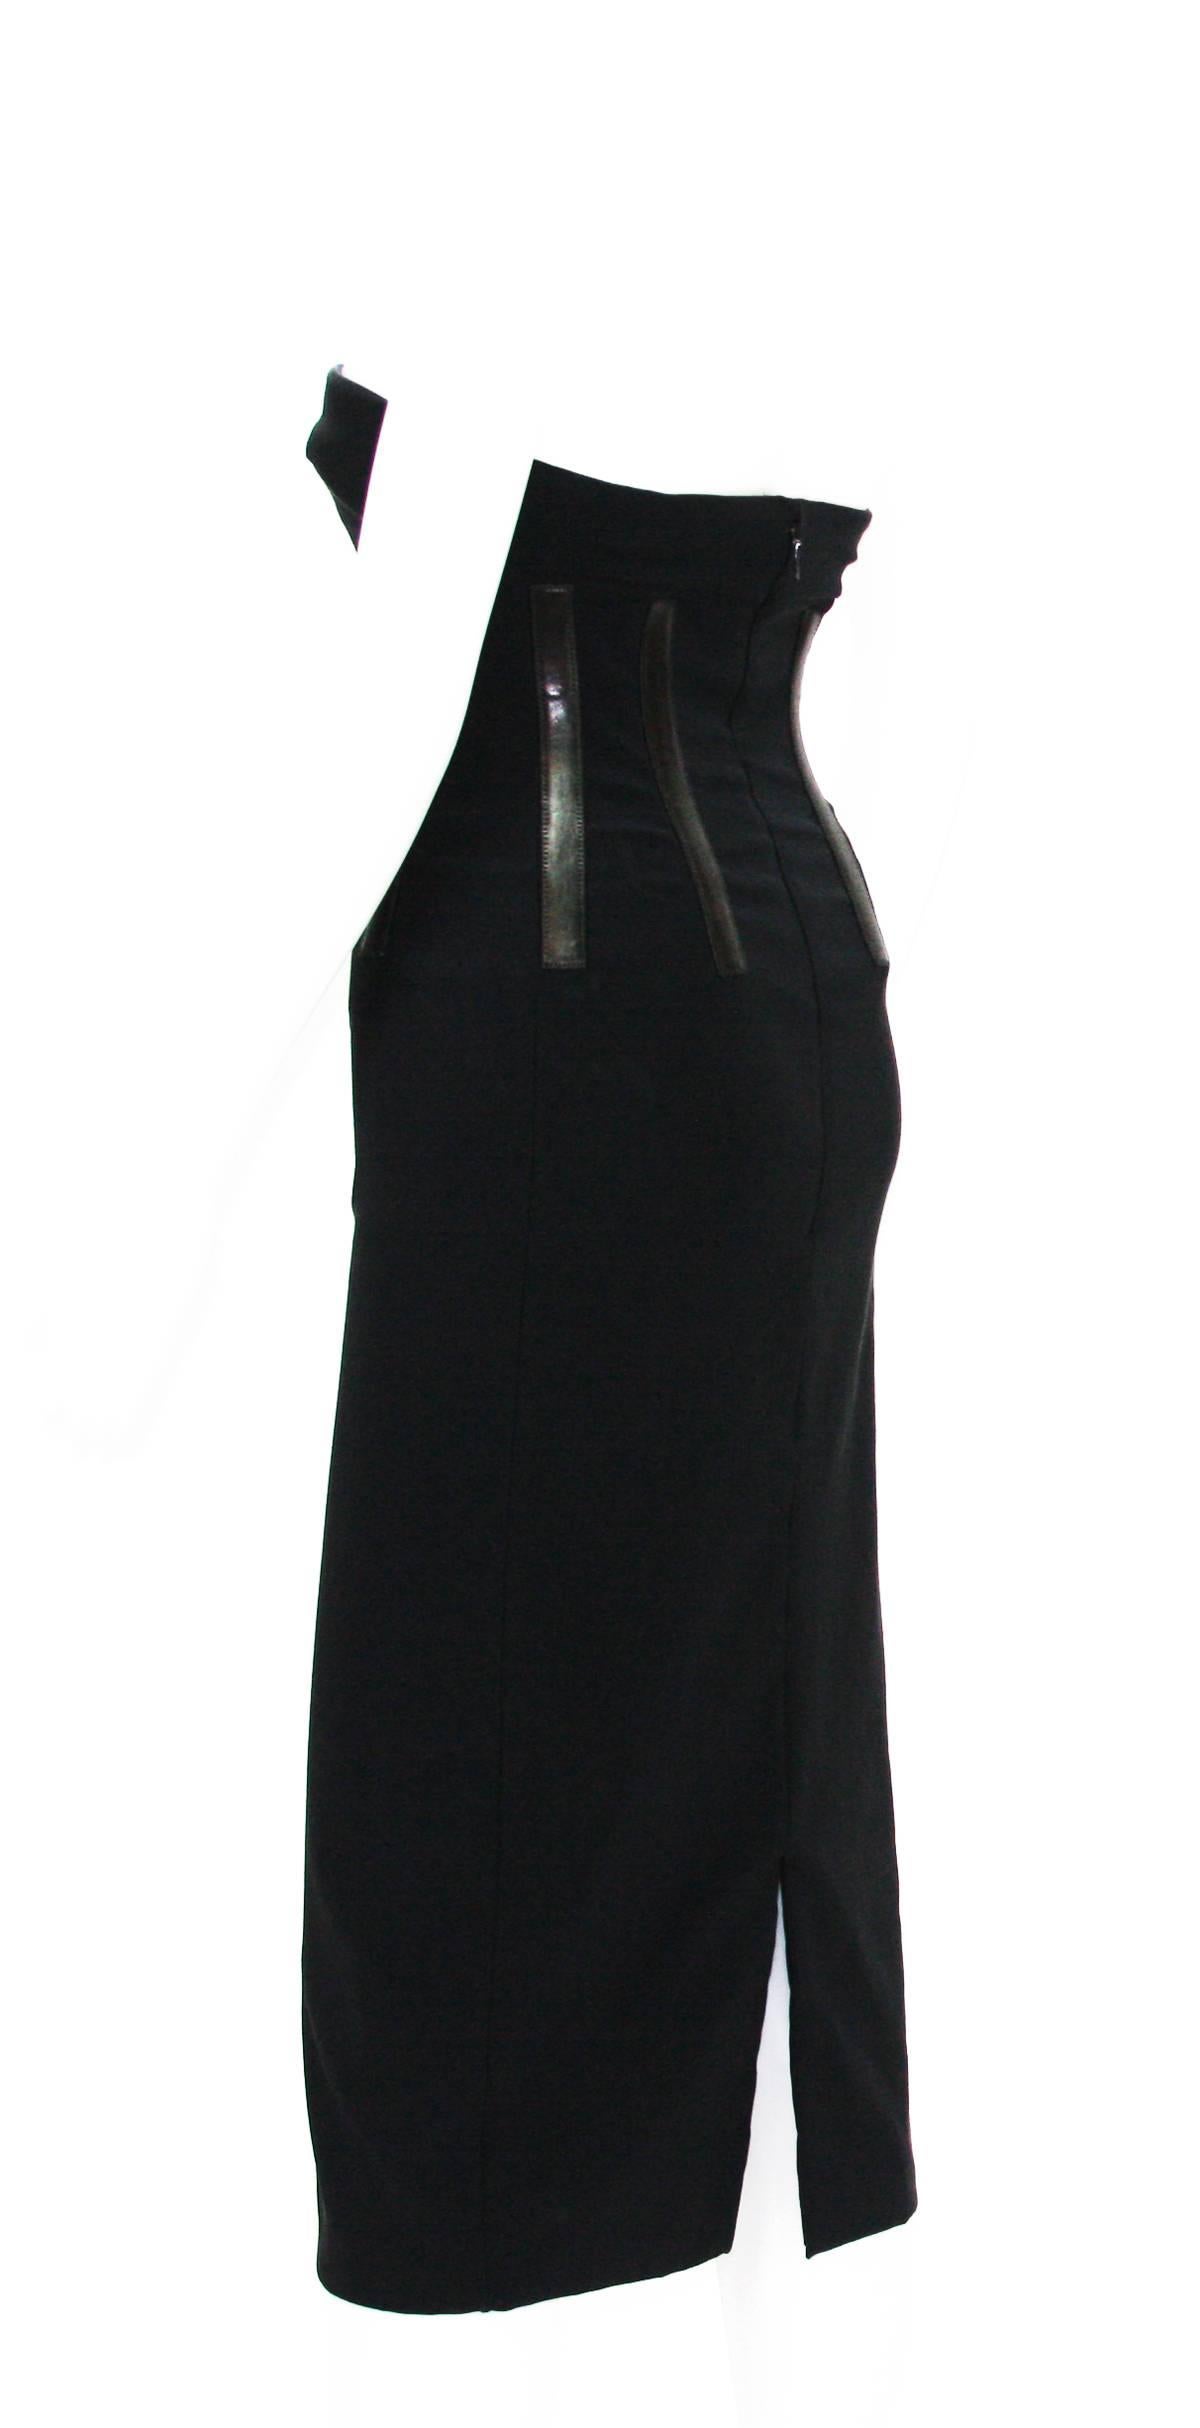 TOM FORD for GUCCI S/S 2001 Corset Leather Detail Cocktail Black Dress 40 - 2/4 In Excellent Condition For Sale In Montgomery, TX